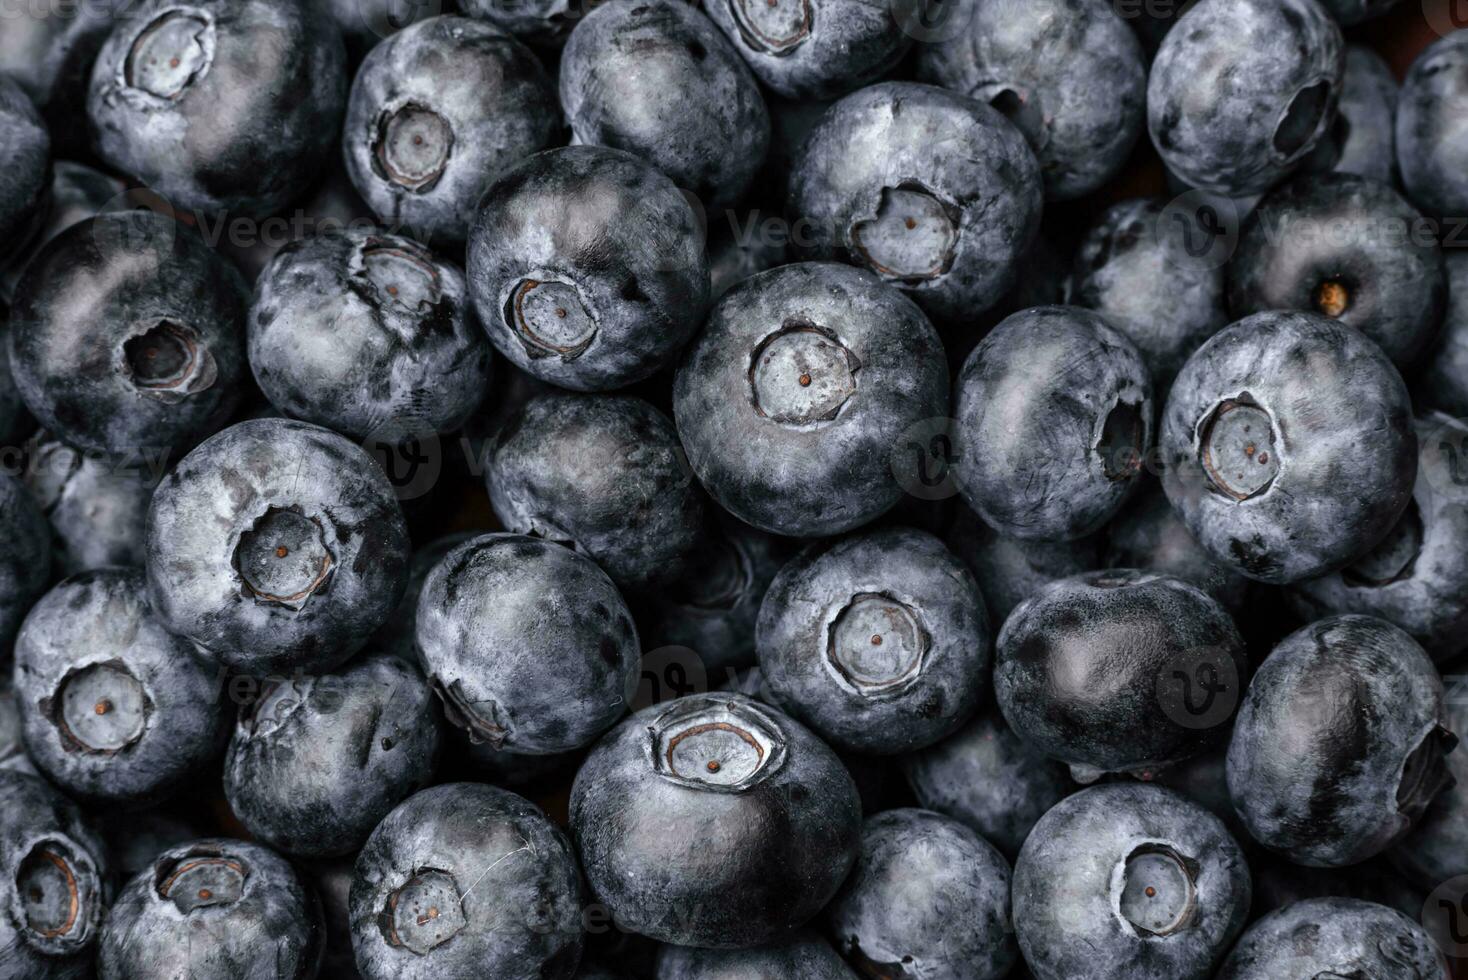 Delicious fresh sweet blueberries in a ceramic bowl. Vegan food photo